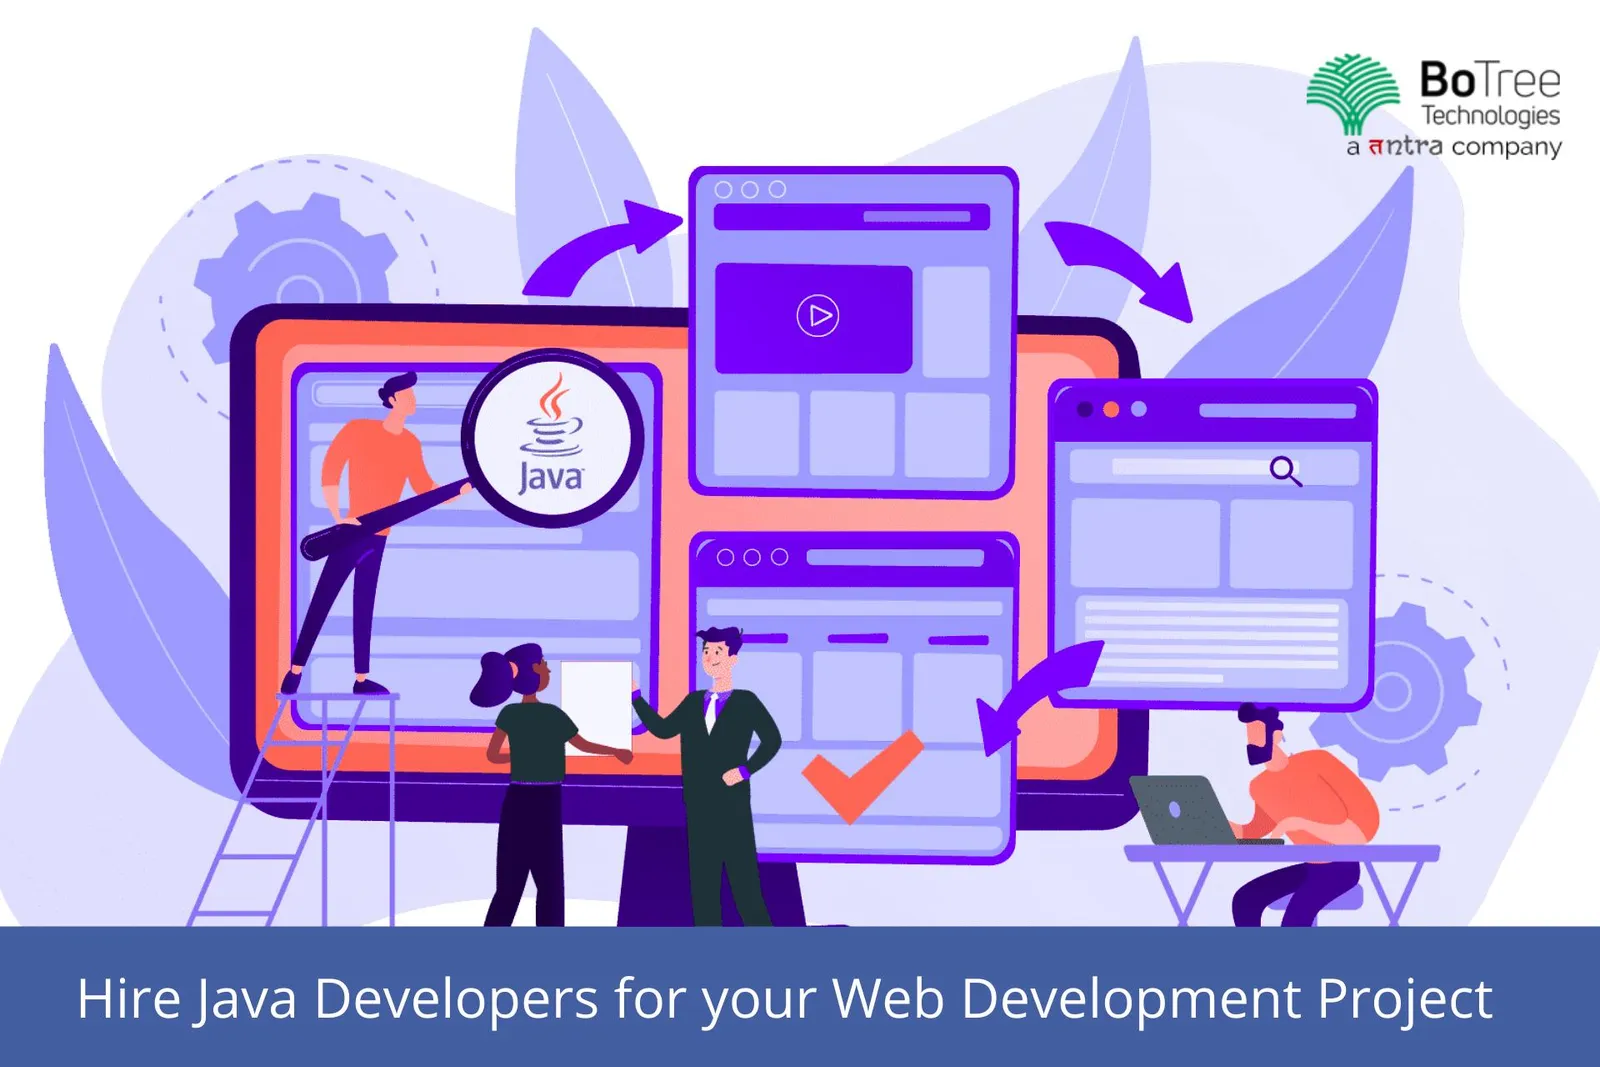 How to Hire Java Developers for your Web Development Project?